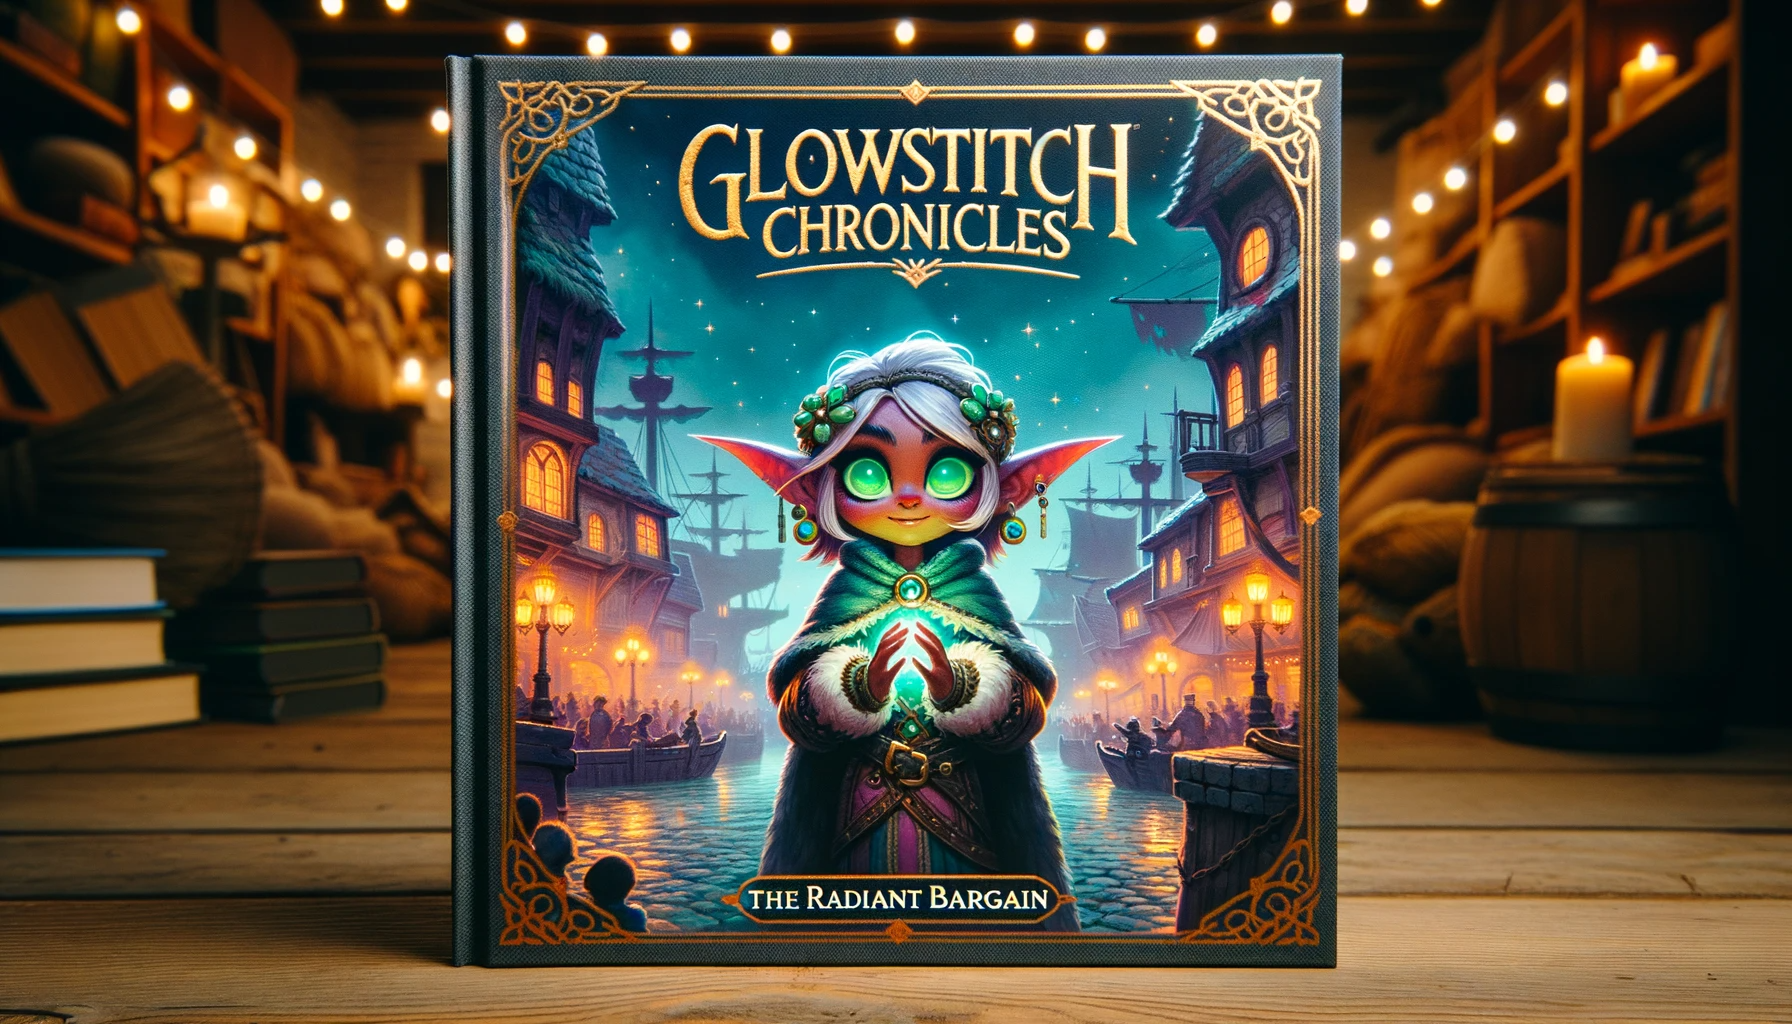 Photo of a grand storybook cover titled 'Glowstitch Chronicles: The Radiant Bargain'. The cover features an illustration of Glowstitch, the petite goblin with emerald eyes, standing at the entrance of her shop in Bilgewater Harbor. The mysterious amulet, pulsing with a soft glow, dangles from her hand, casting a light on the cobbled streets. The background is a mix of the bustling harbor, ships, and silhouettes of adventurers, all beneath a twilight sky shimmering with stars.